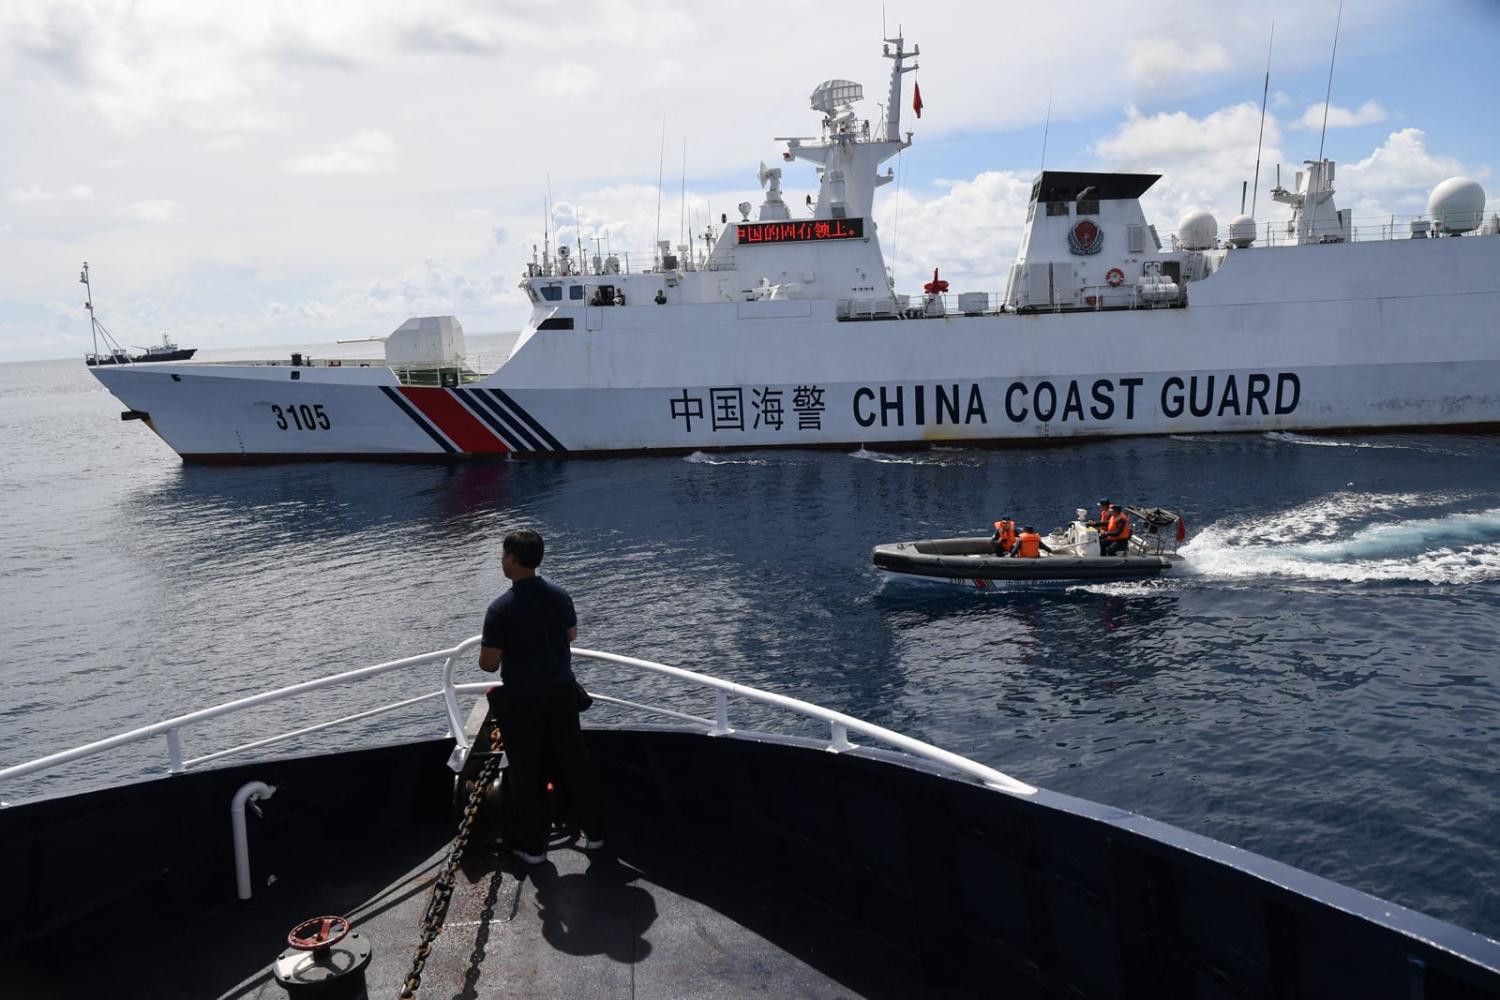 A Chinese Coast Guard ship last month impeding a Philippine Bureau of Fisheries and Aquatic Resources vessel near Scarborough Shoal (Ted Aljibe/AFP via Getty Images) 